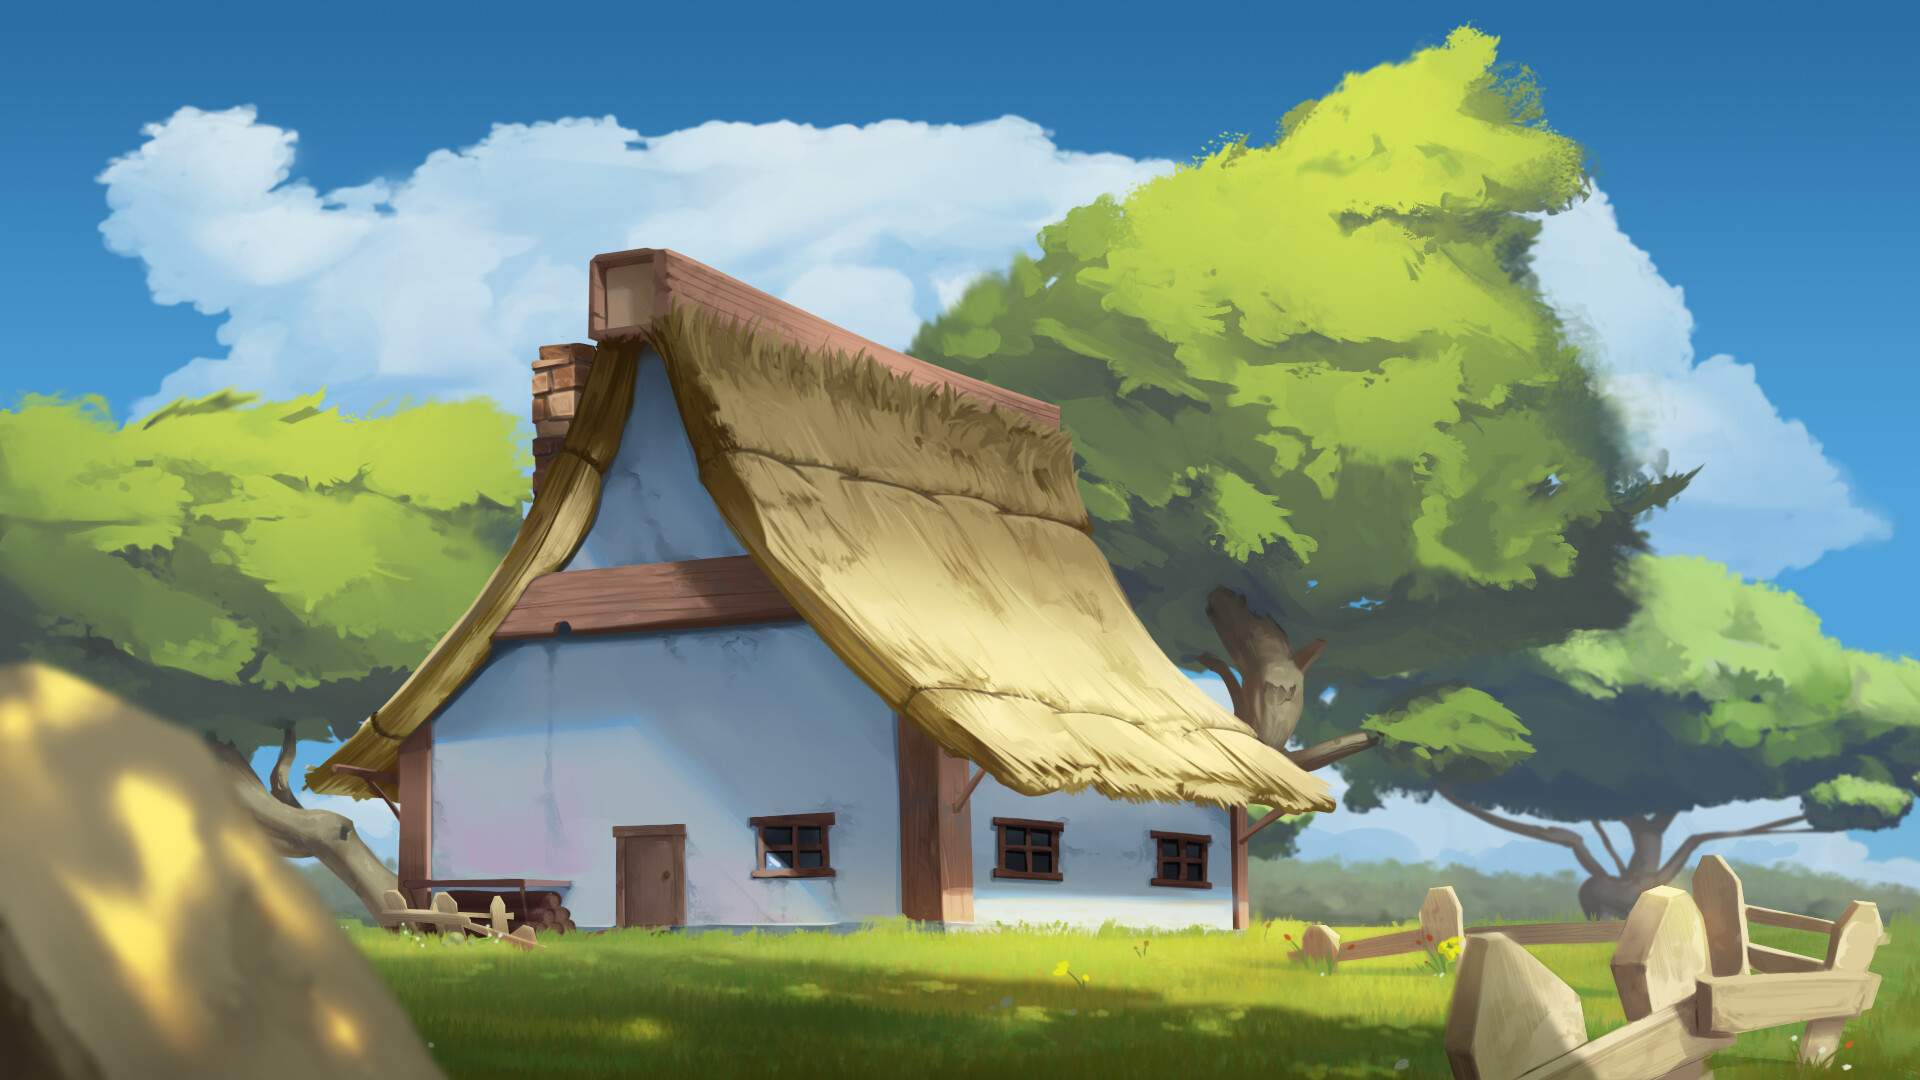 ArtStation - Peacful House in the countryside ! - Animation background